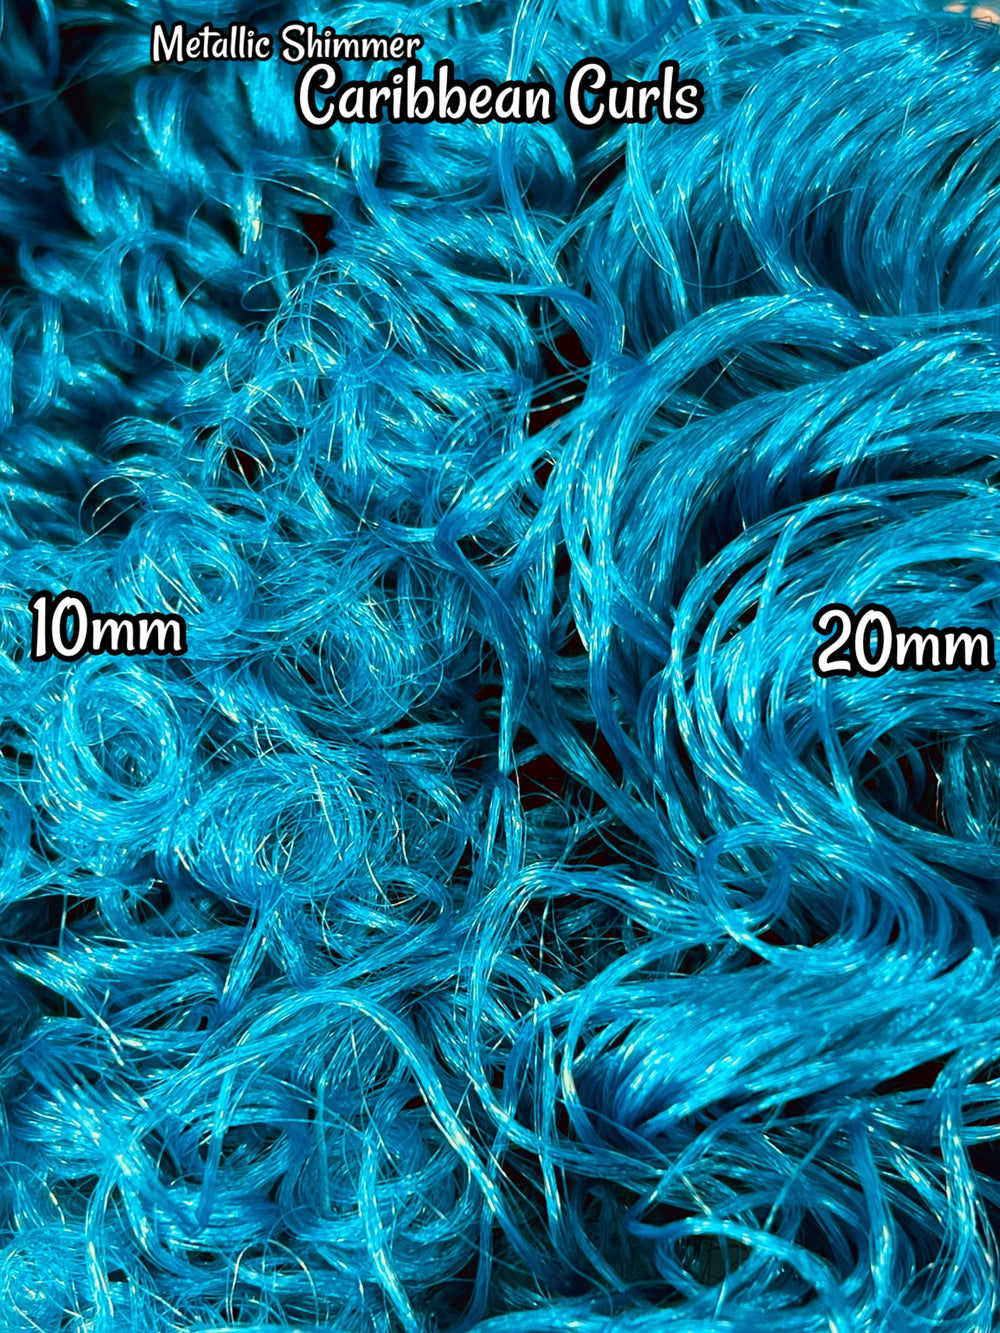 DG Curly Metallic Shimmer Caribbean 10mm 20mm YN2139-1 turquoise 36 inch 0.5oz/14g pre-curled Nylon Doll Hair for rerooting fashion dolls